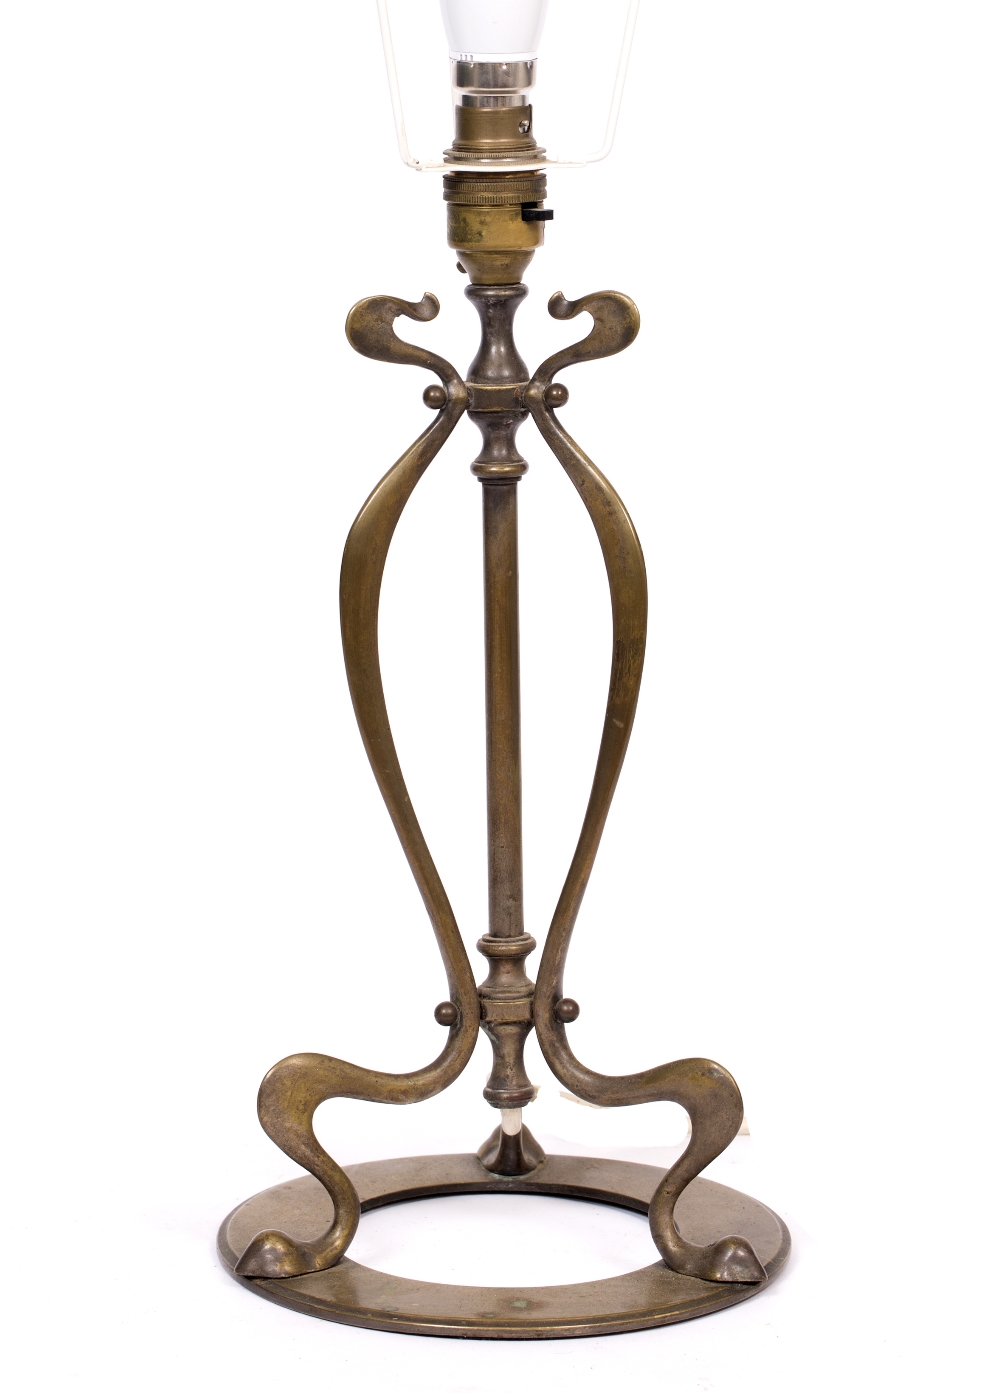 AN EARLY 20TH CENTURY BRASS TABLE LAMP of Art Nouveau form, in the manner of W.A.S. Benson 35.5cm